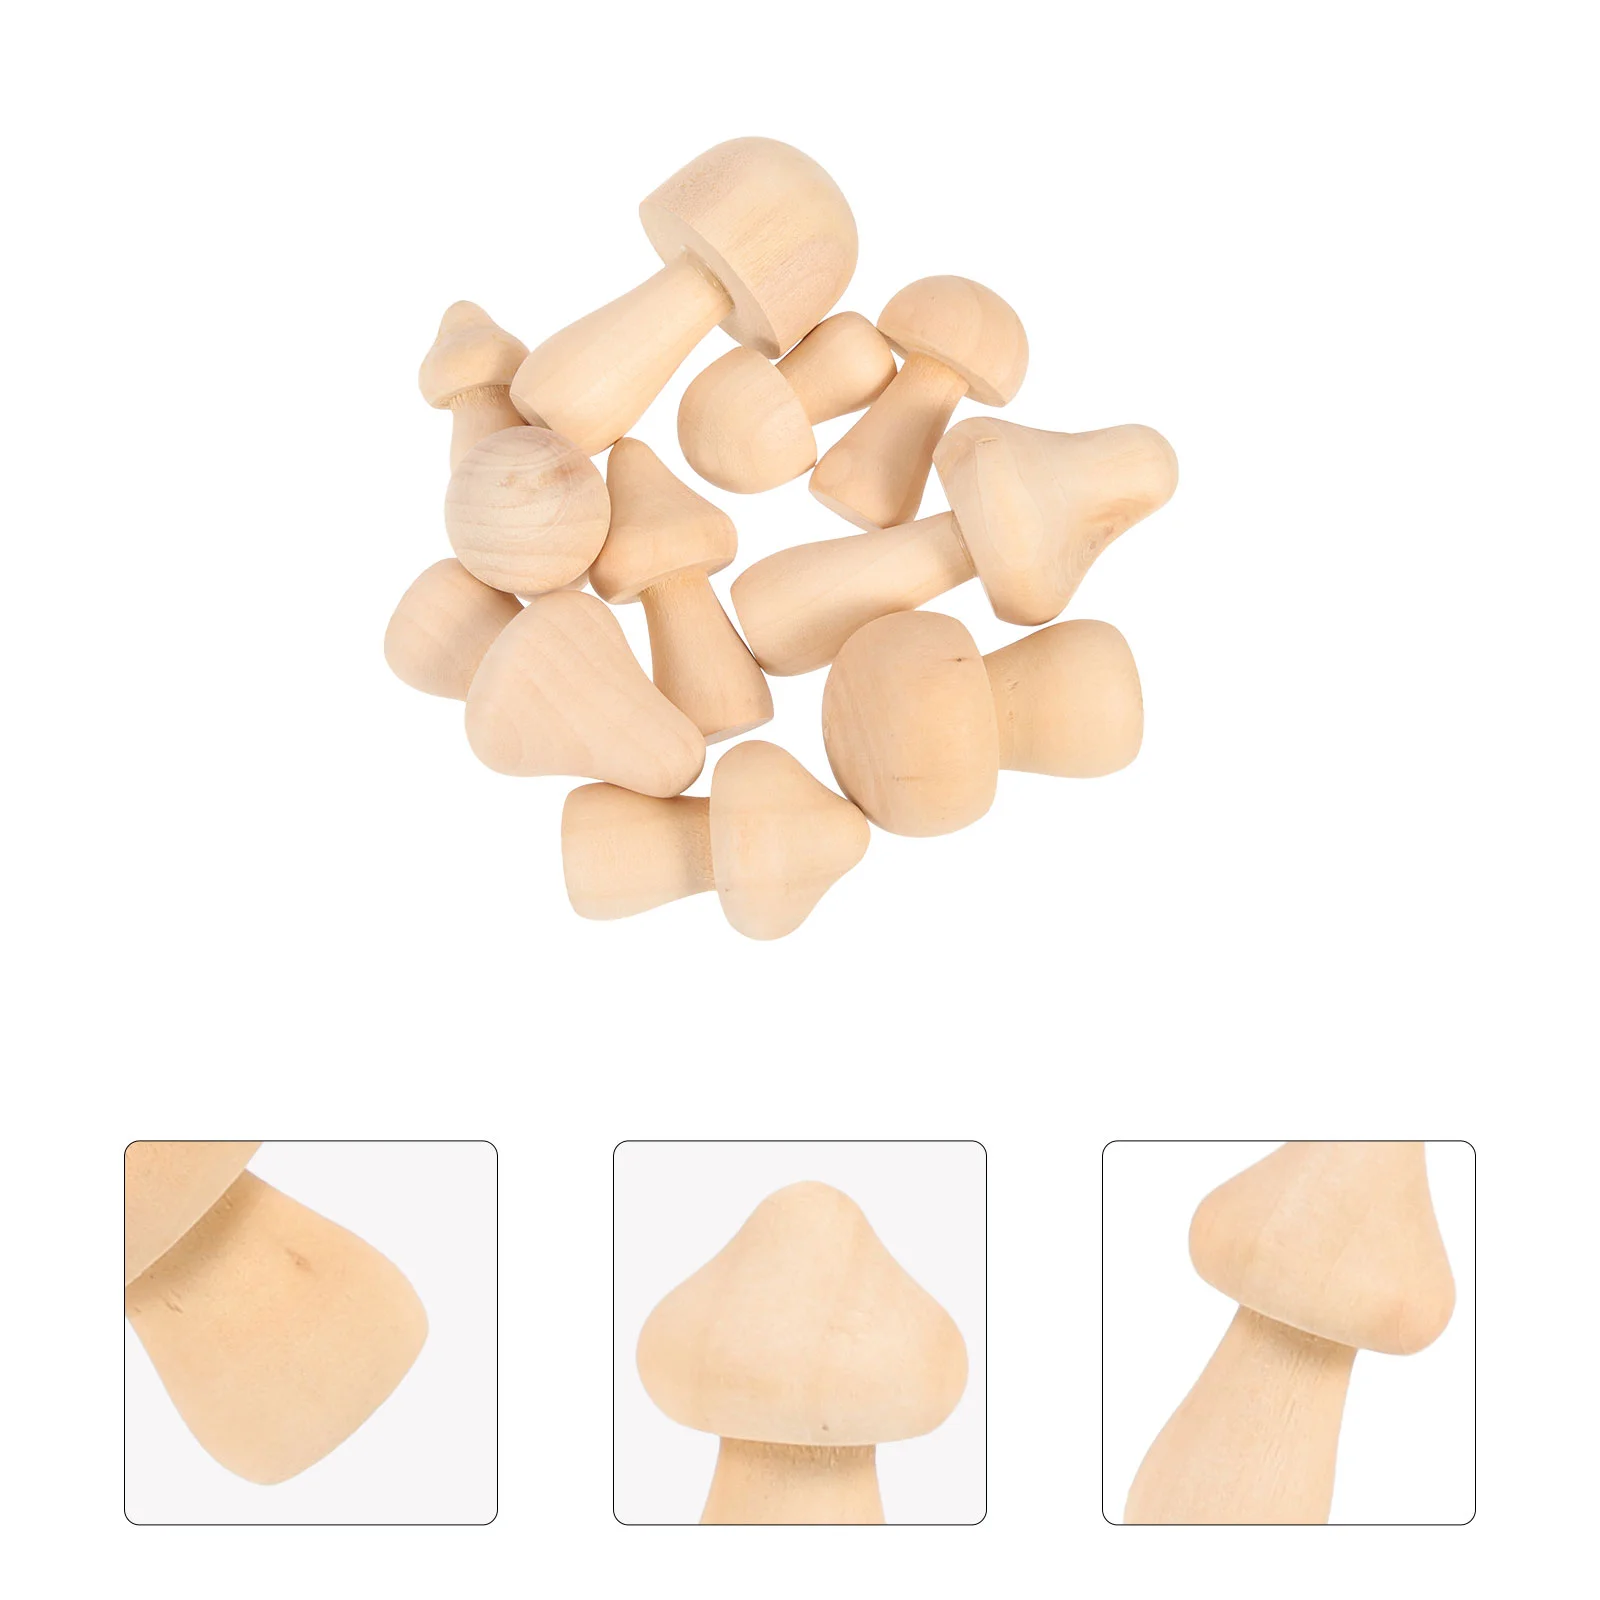 

10 Pcs Wood Mushroom Decor Things Mushrooms Crafts Toys Wooden Kids Painting Unfinished Plain Drawing Shapes